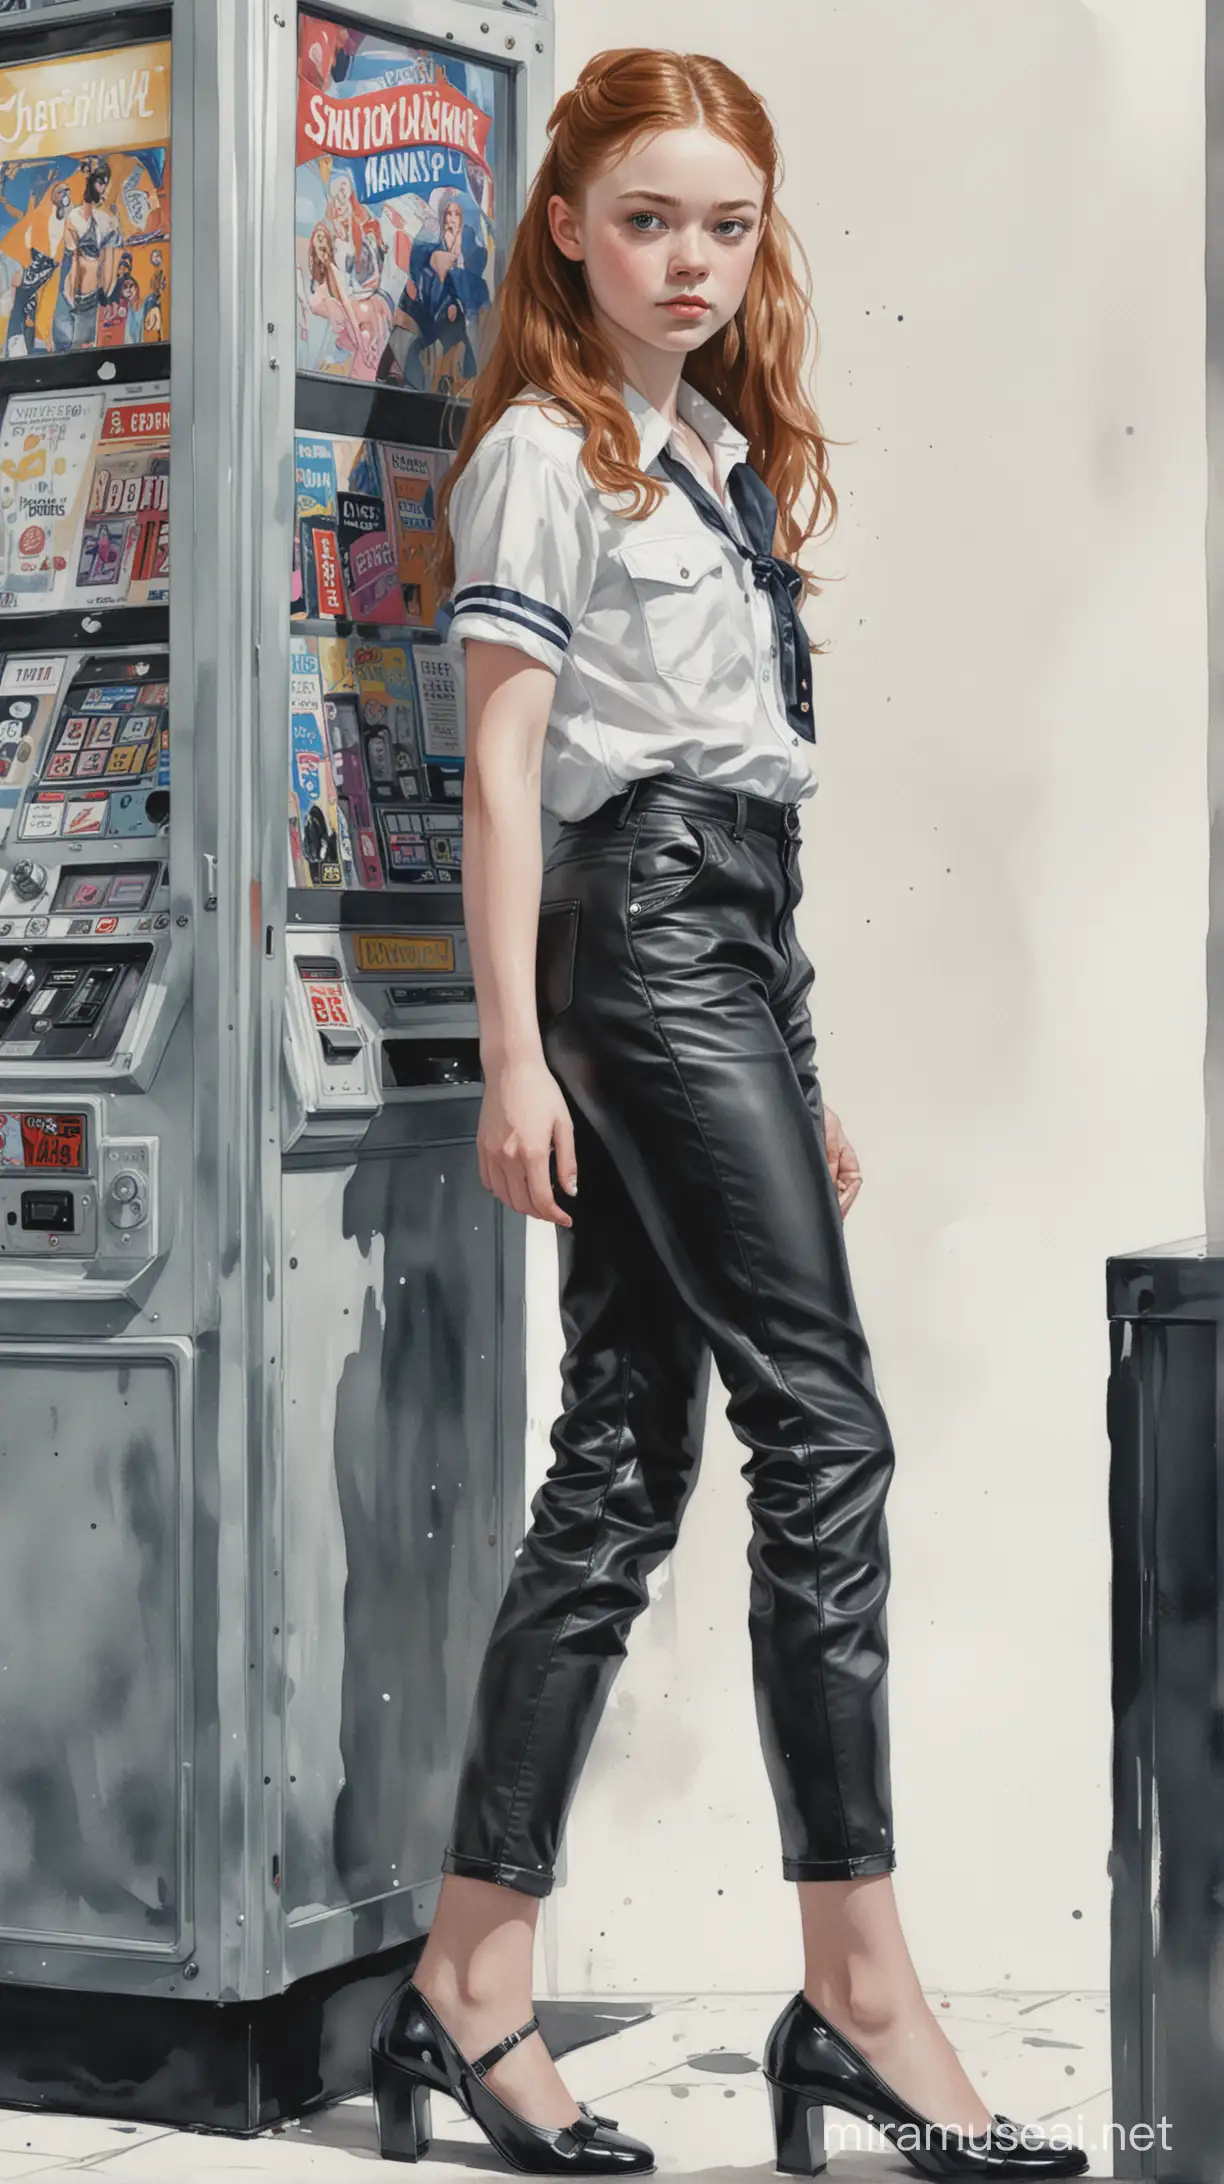 Alex Maleev illustration depicting young Sadie Sink wearing sailor shirt and shiny tight black leather pants, gray flat pumps, bun hair, leaning in front of an arcade game machine, watercolor, white background, no distortion, gray palette, insanely high detail, very high quality, seen from below